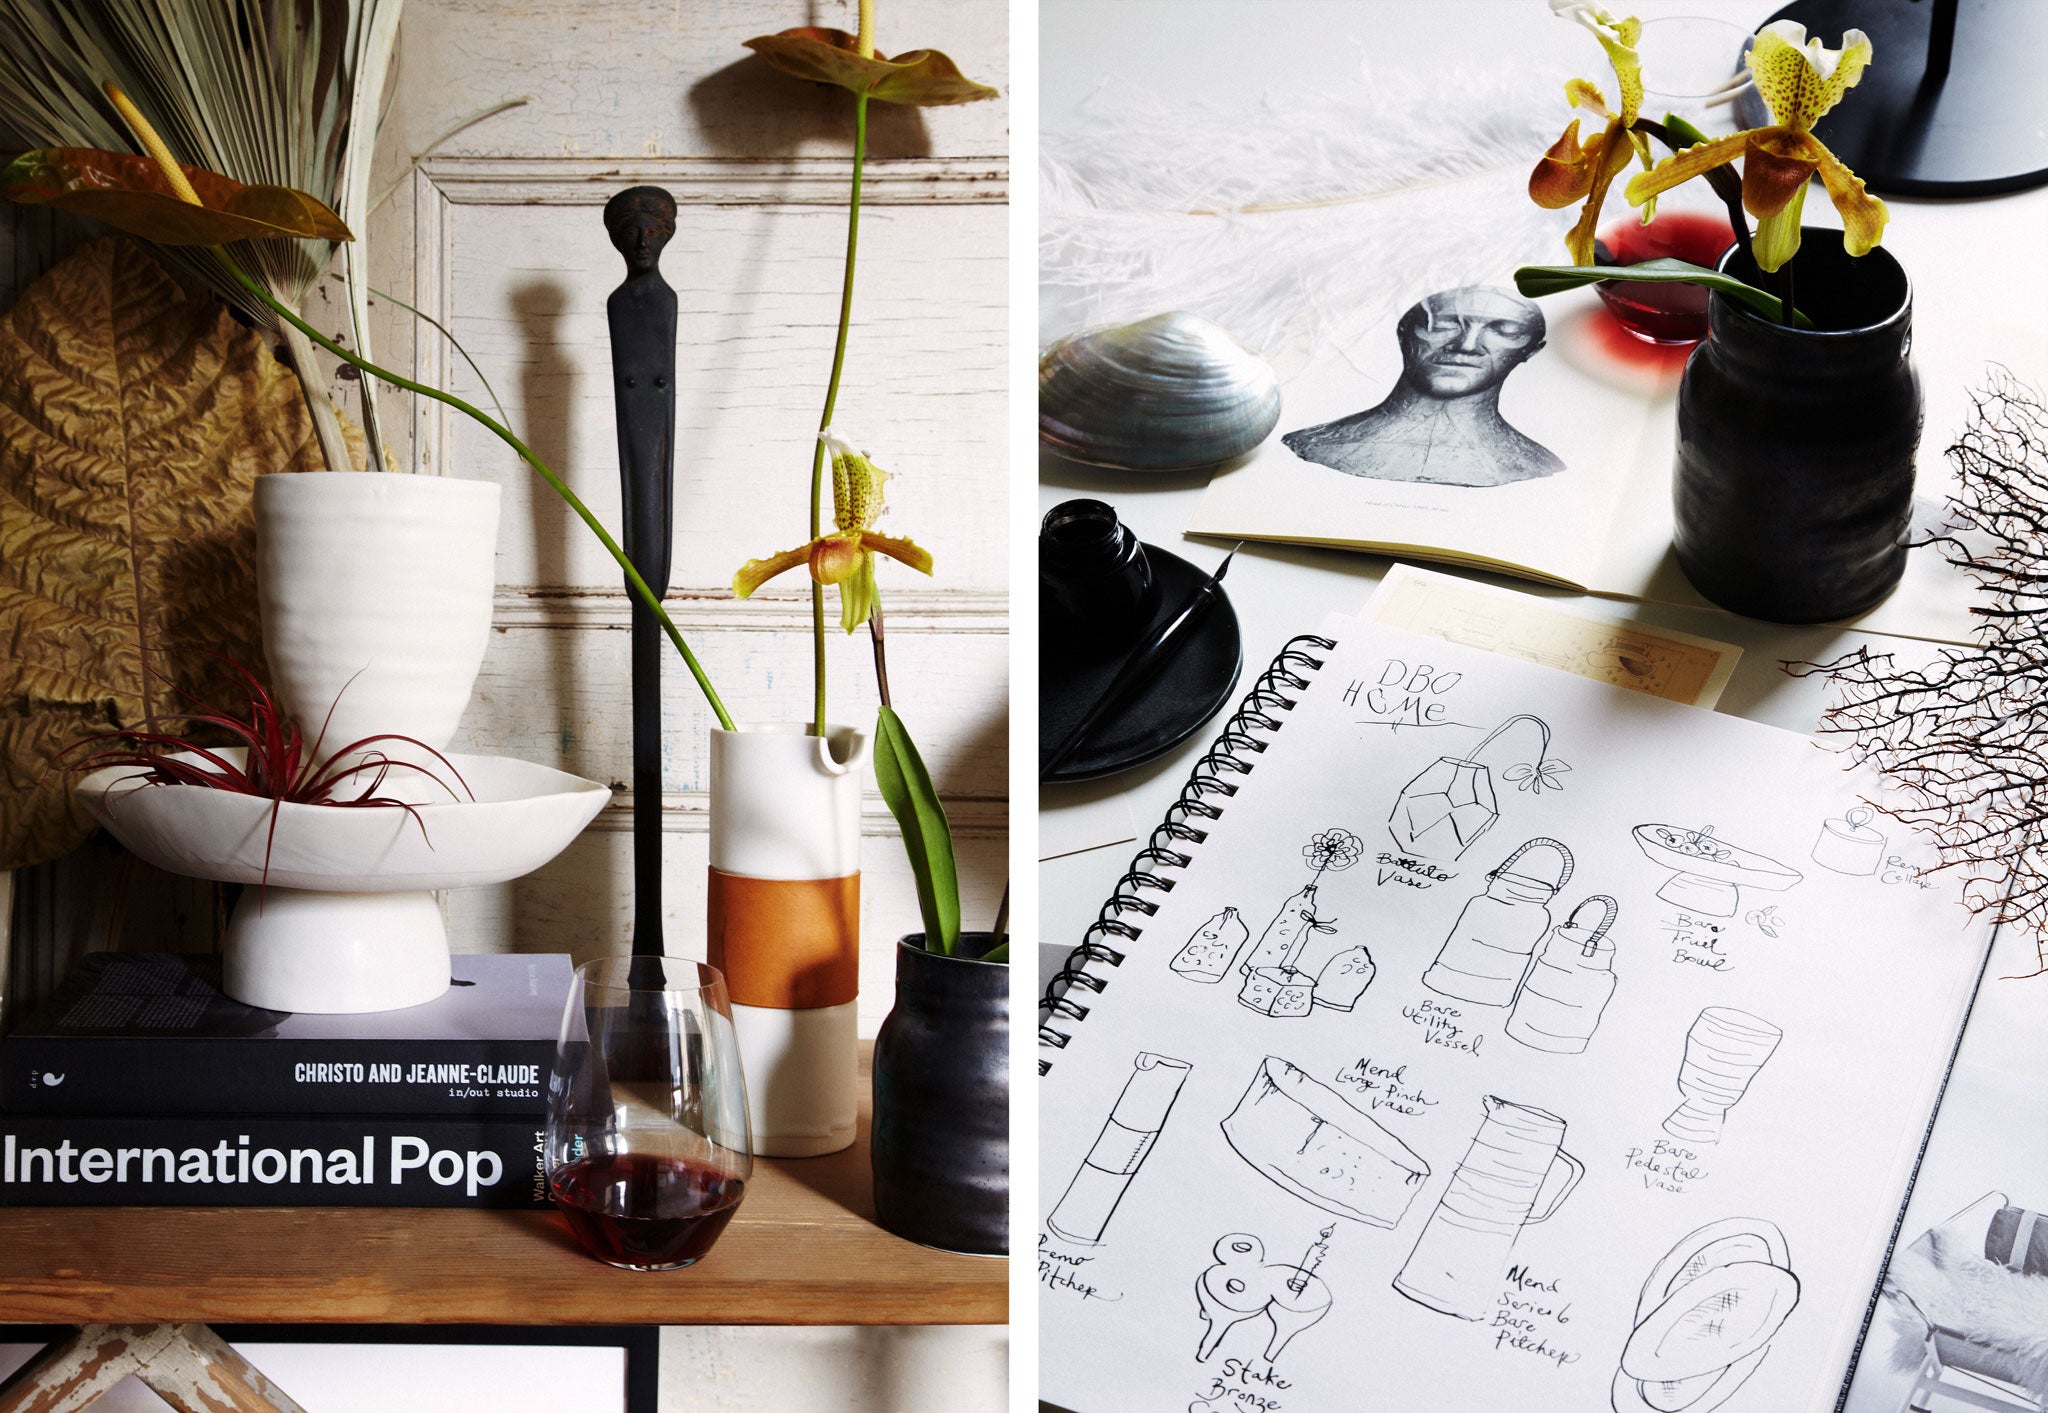 DBO HOME artisan ceramic vases styled by Marcus Hay with a notebook of drawings and sketches of DBO HOME pieces